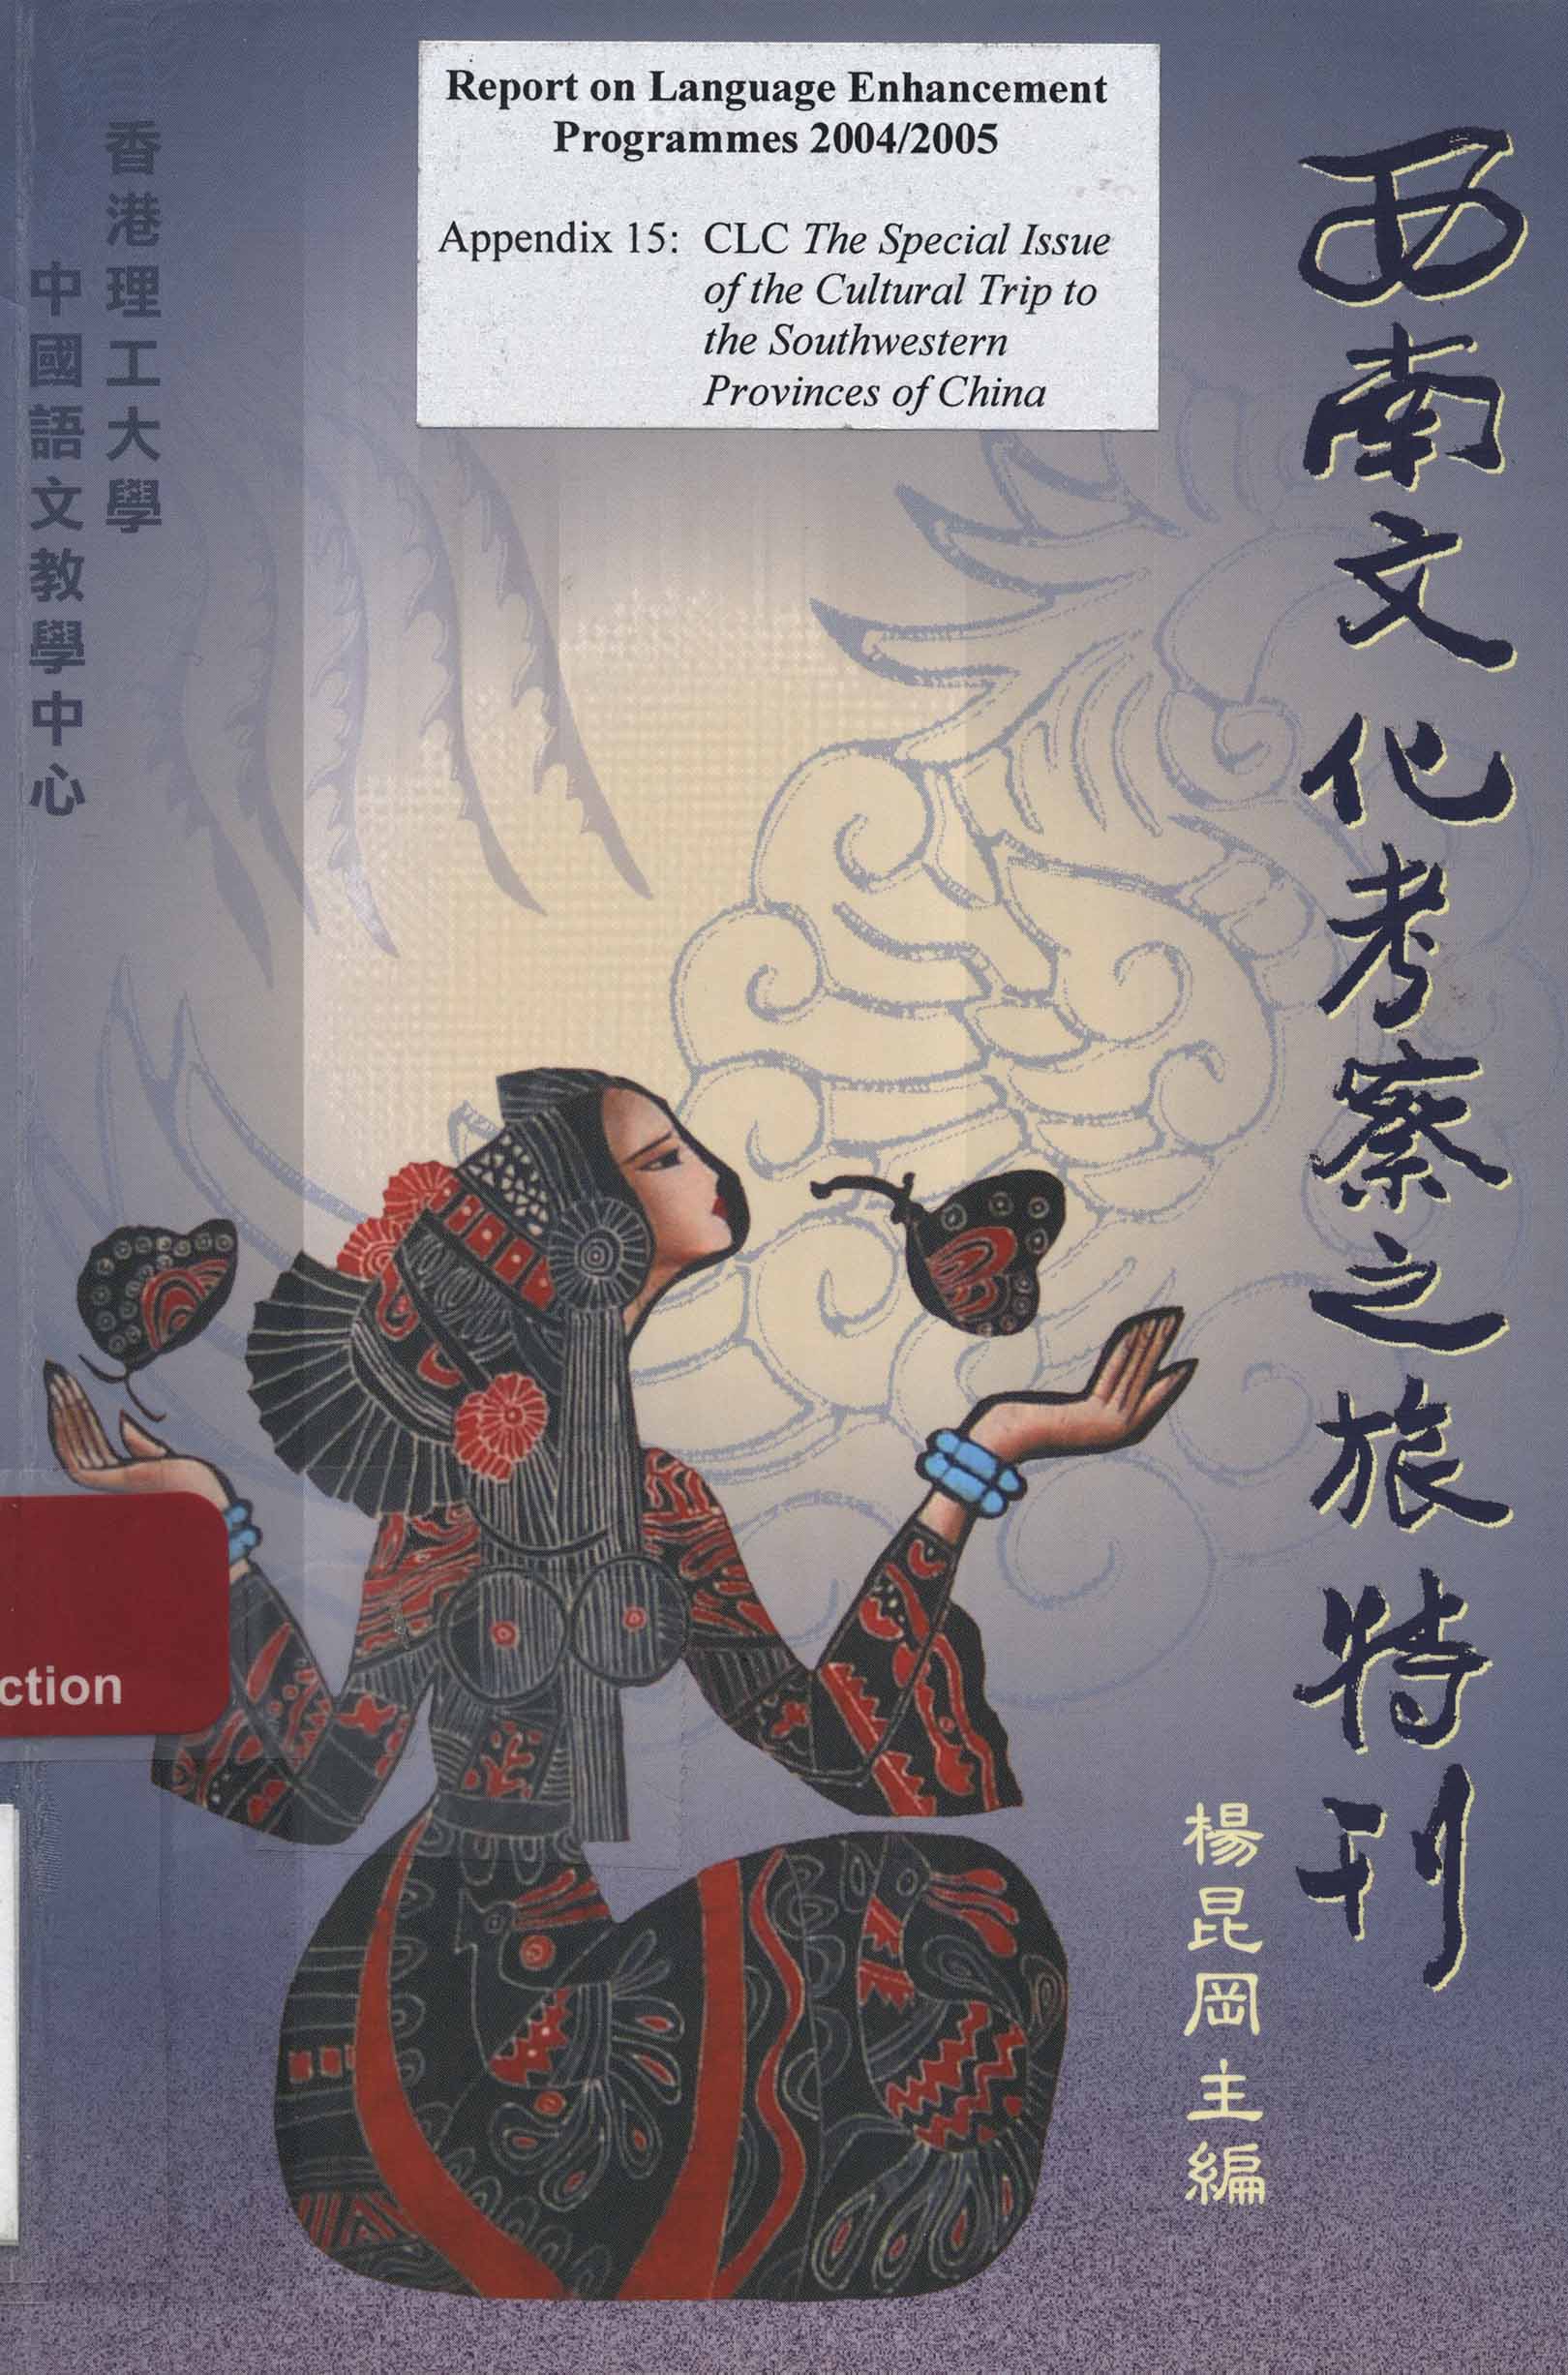 Annual report on language enhancement programmes [2004/2005] - Appendix 15: CLC The special issue of the cultural trip to the Southwestern provinces of China 